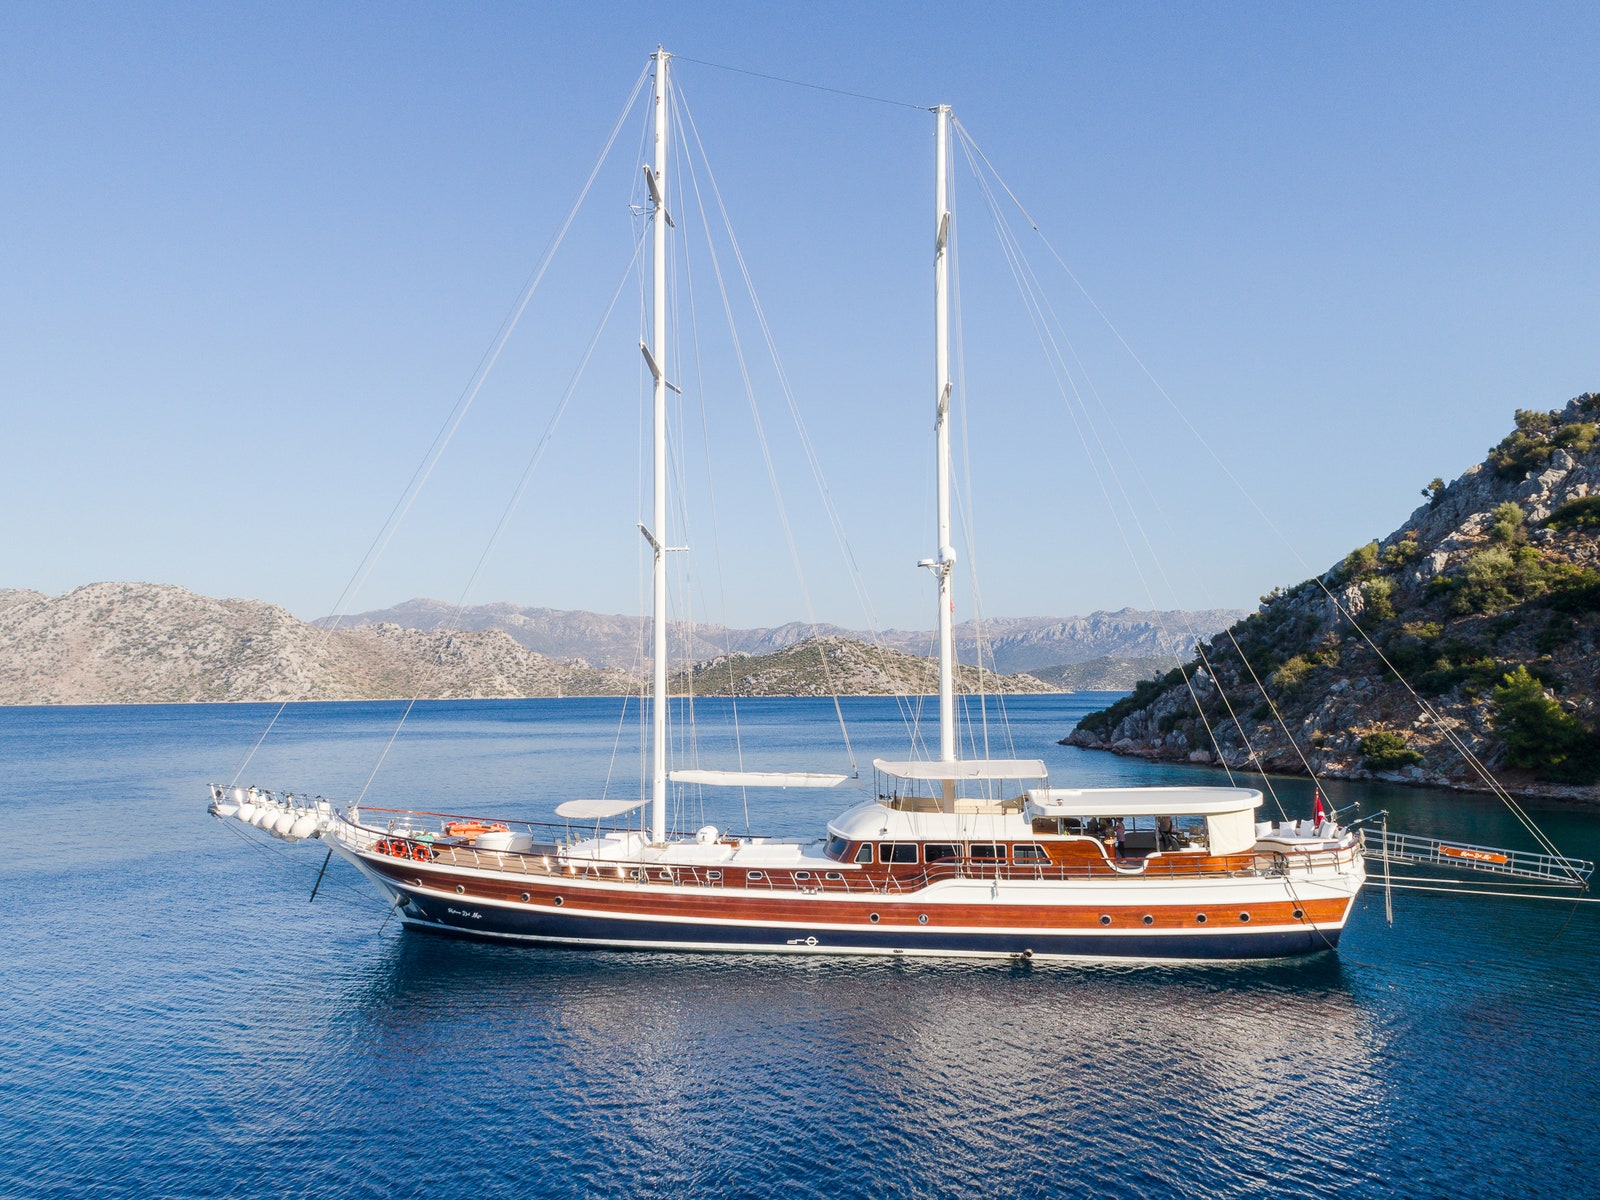 The Best Private Yacht Charters for Small Groups